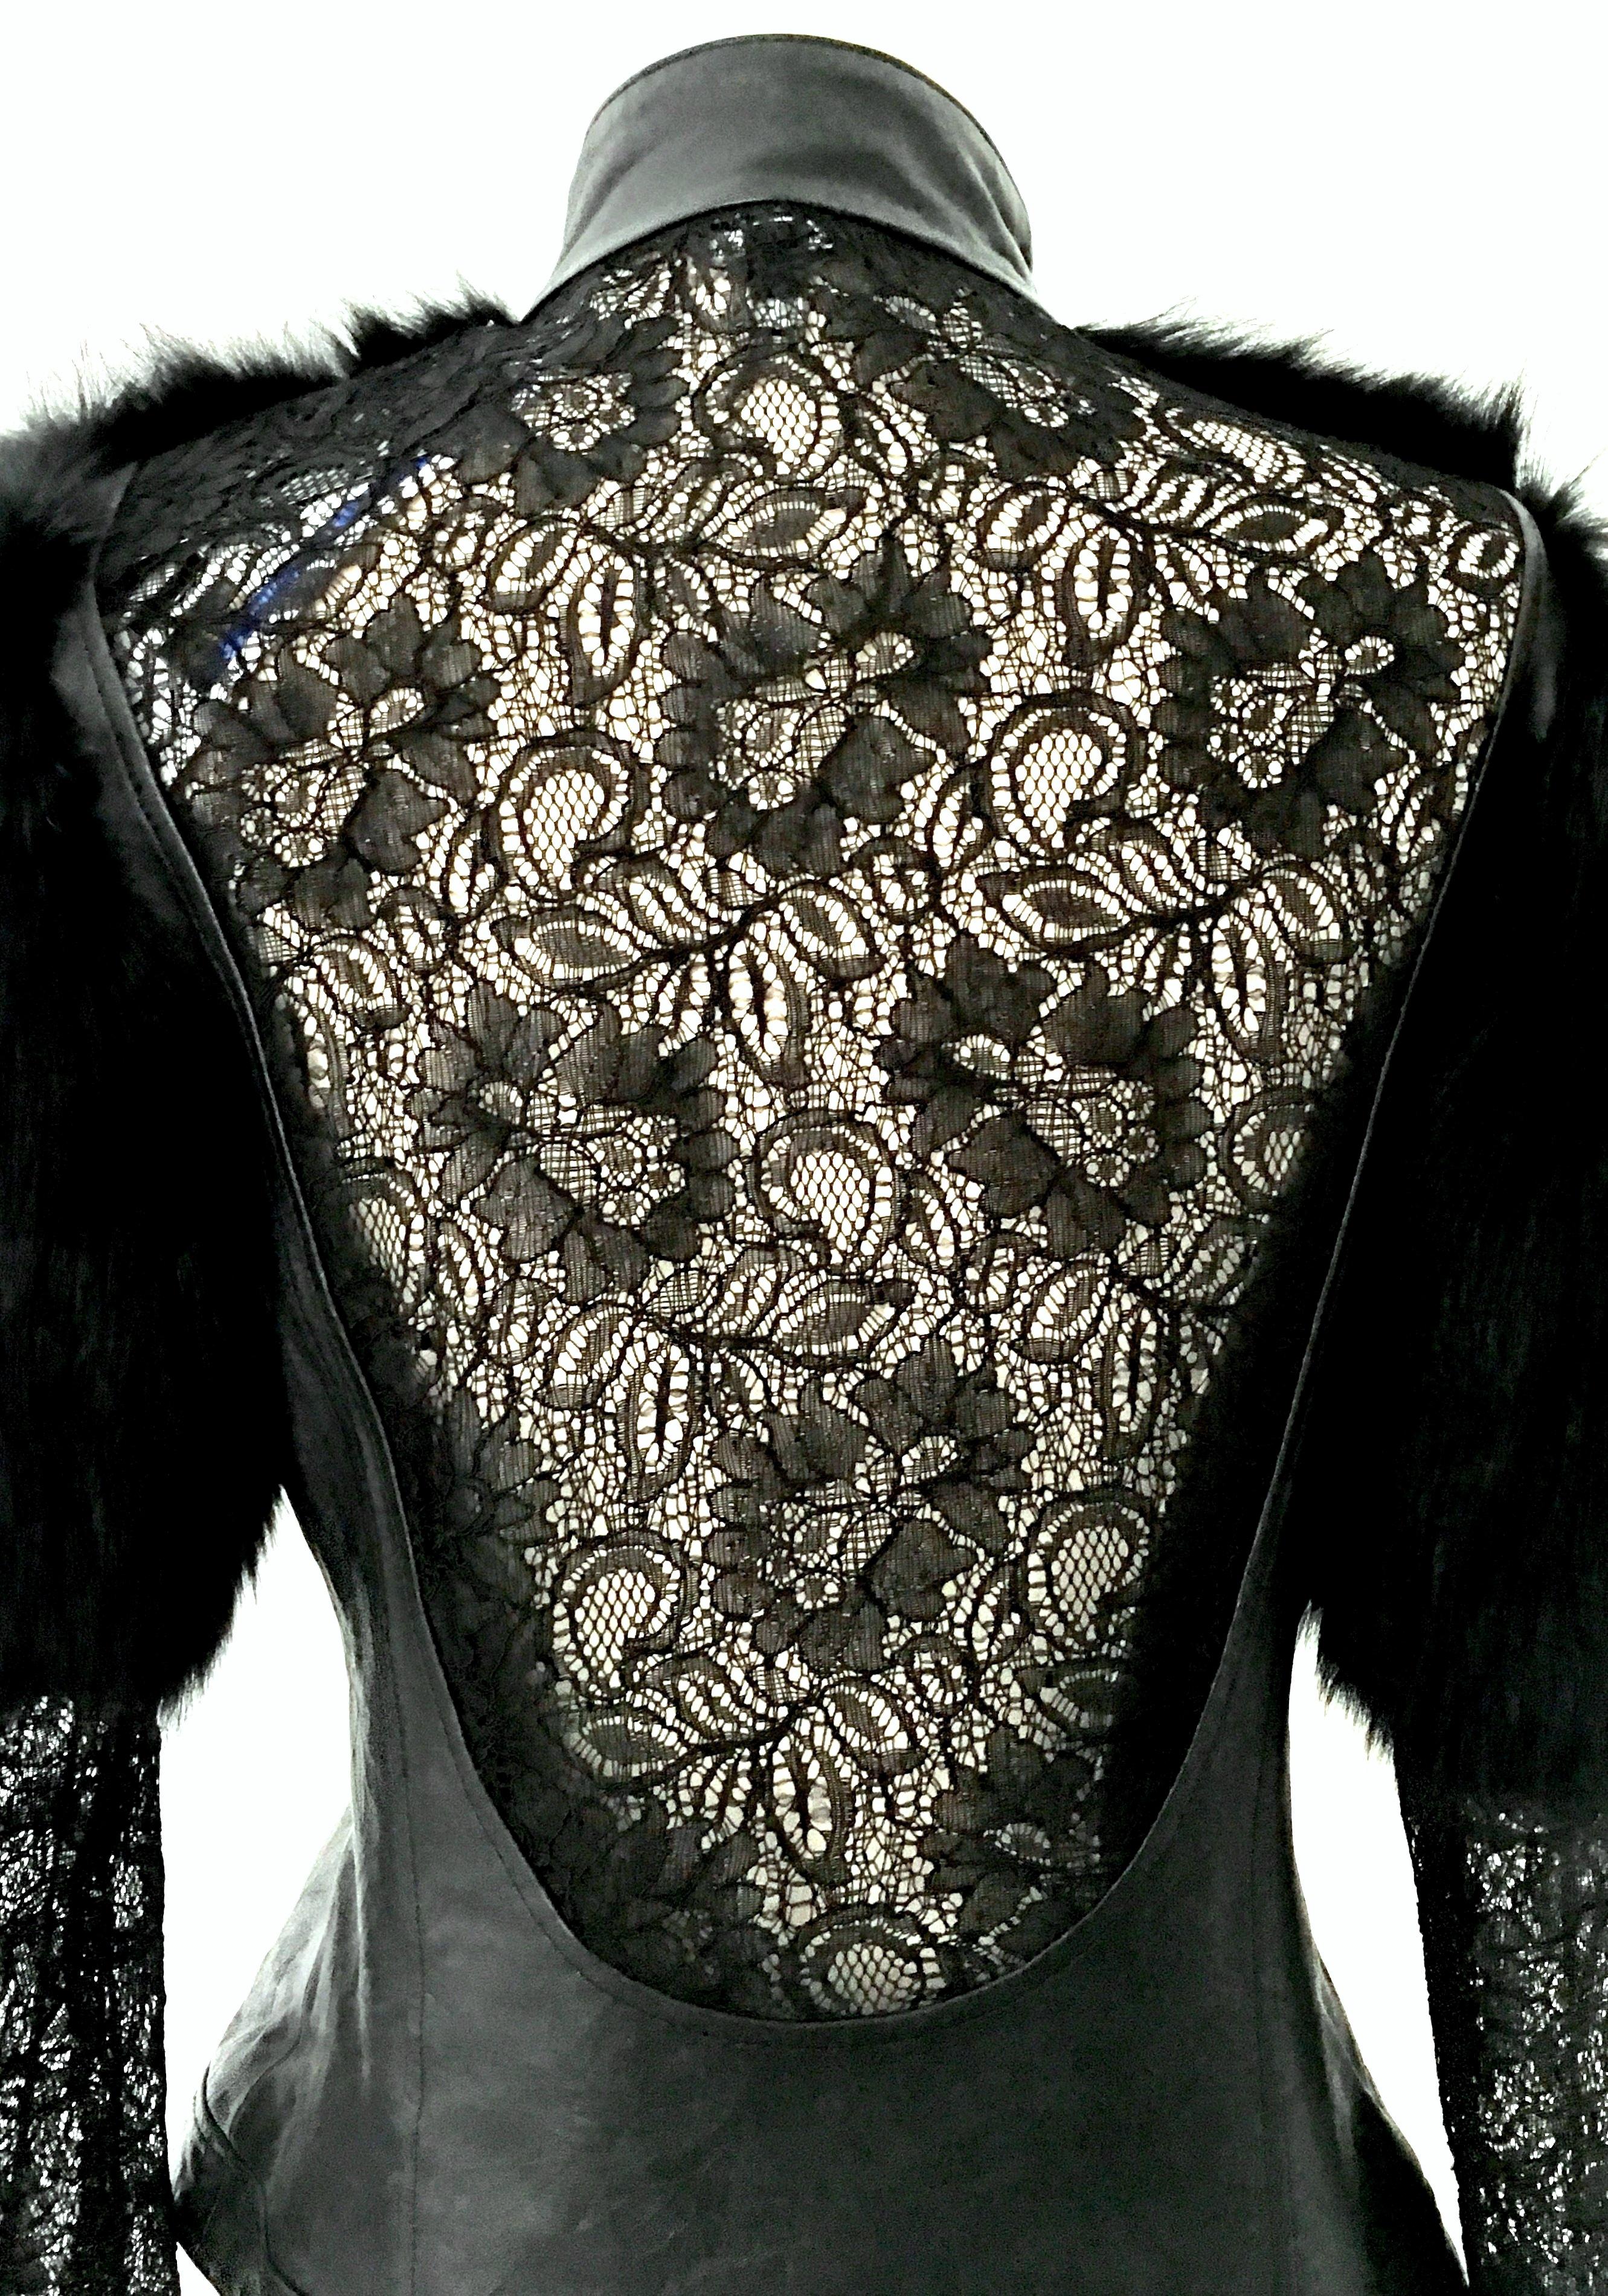 21st Century New Leather Fox Fur & Lace Shirt Or Jacket By, Royal Underground 1